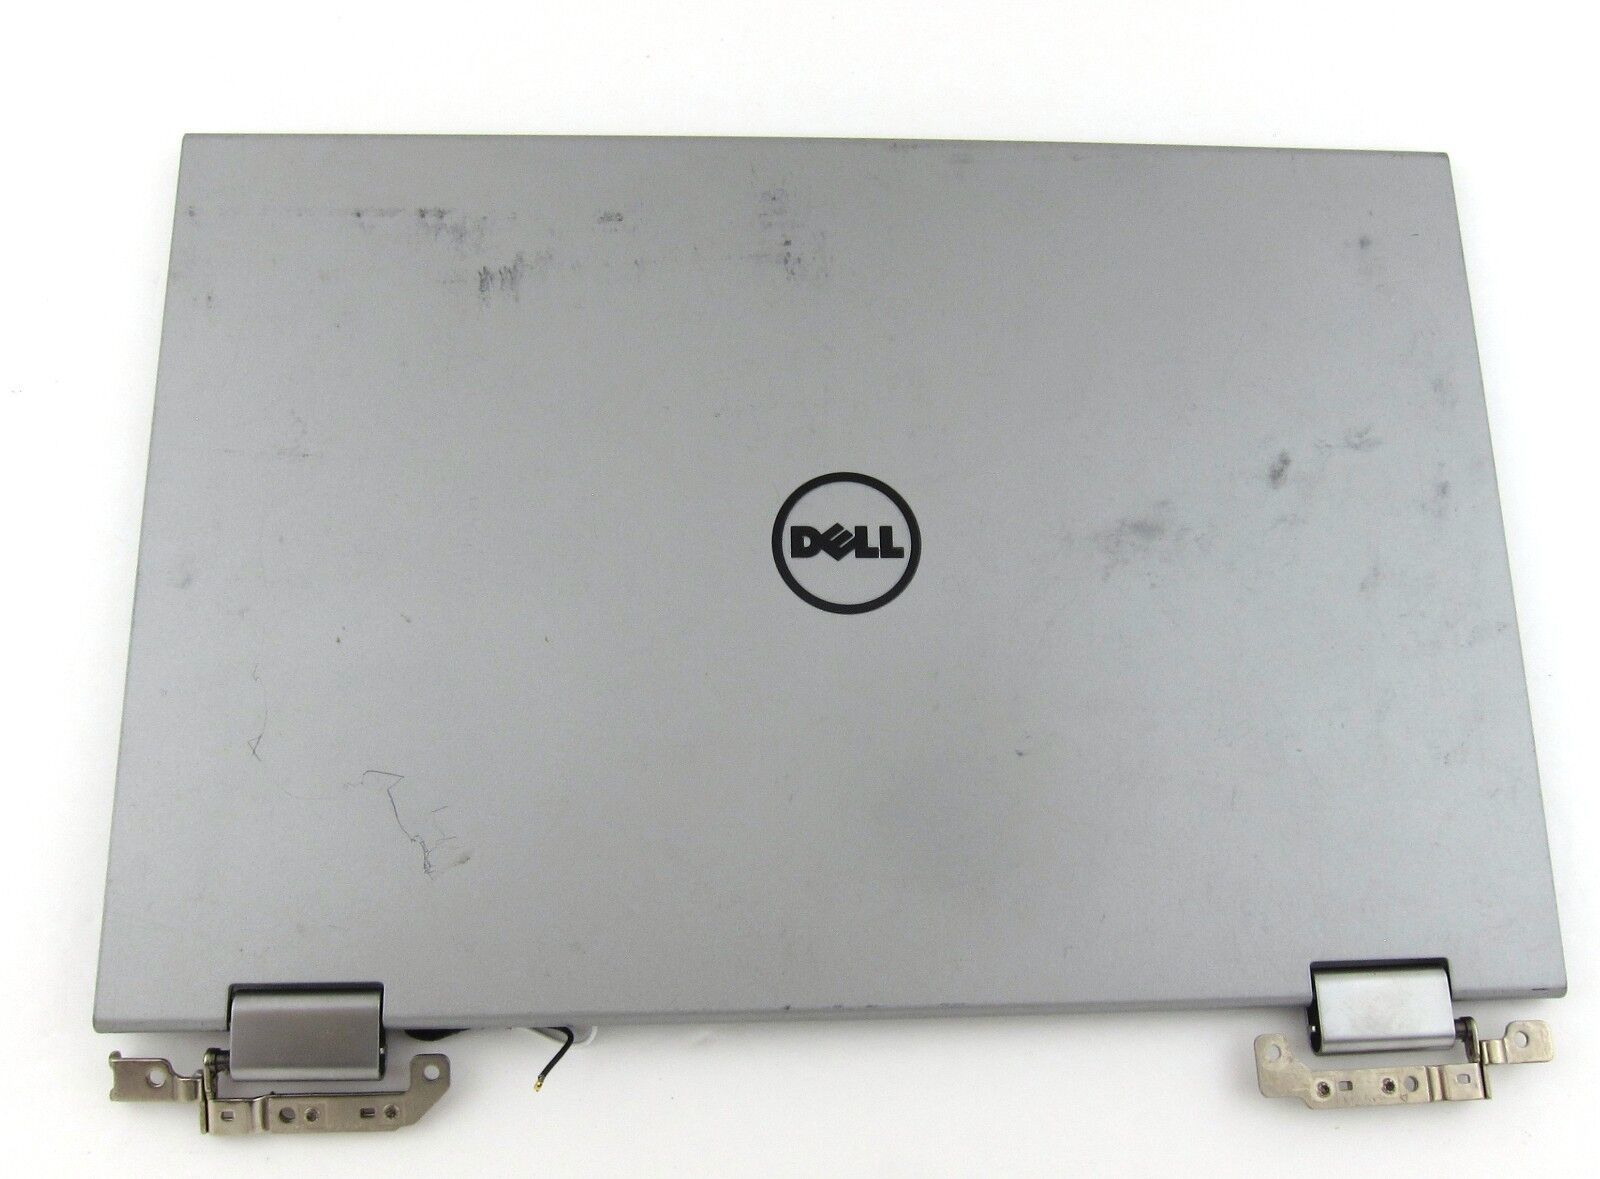 Primary image for Dell Inspiron 11 3147 / 3148 11.6" LCD Back Cover Lid with Hinges - XYWC8 478